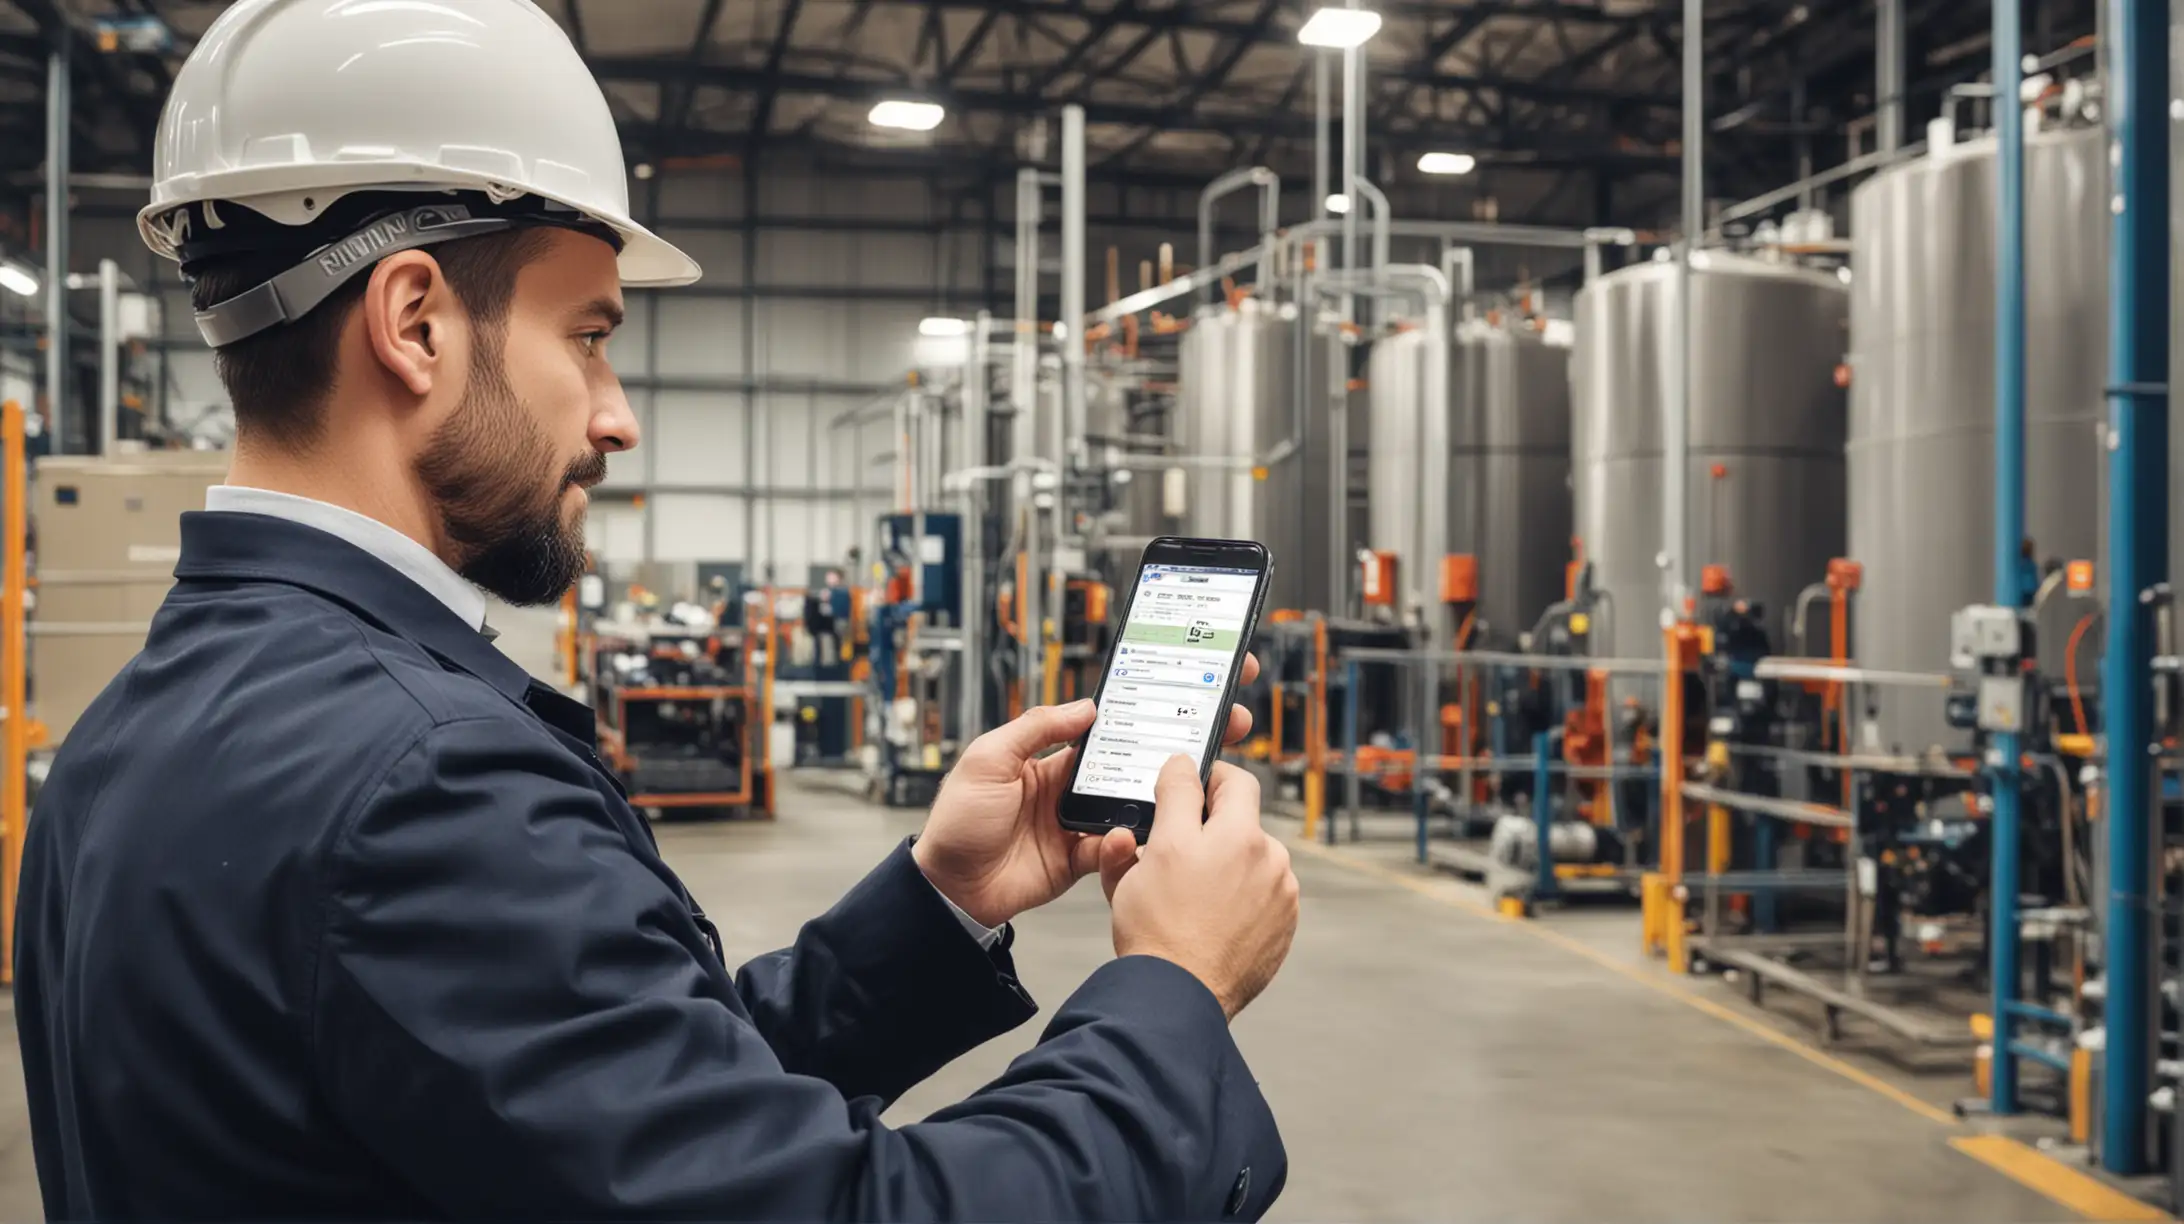 Efficient Factory Supervision with Rondinc SmartphoneControlled Tours Ensuring Industry Safety